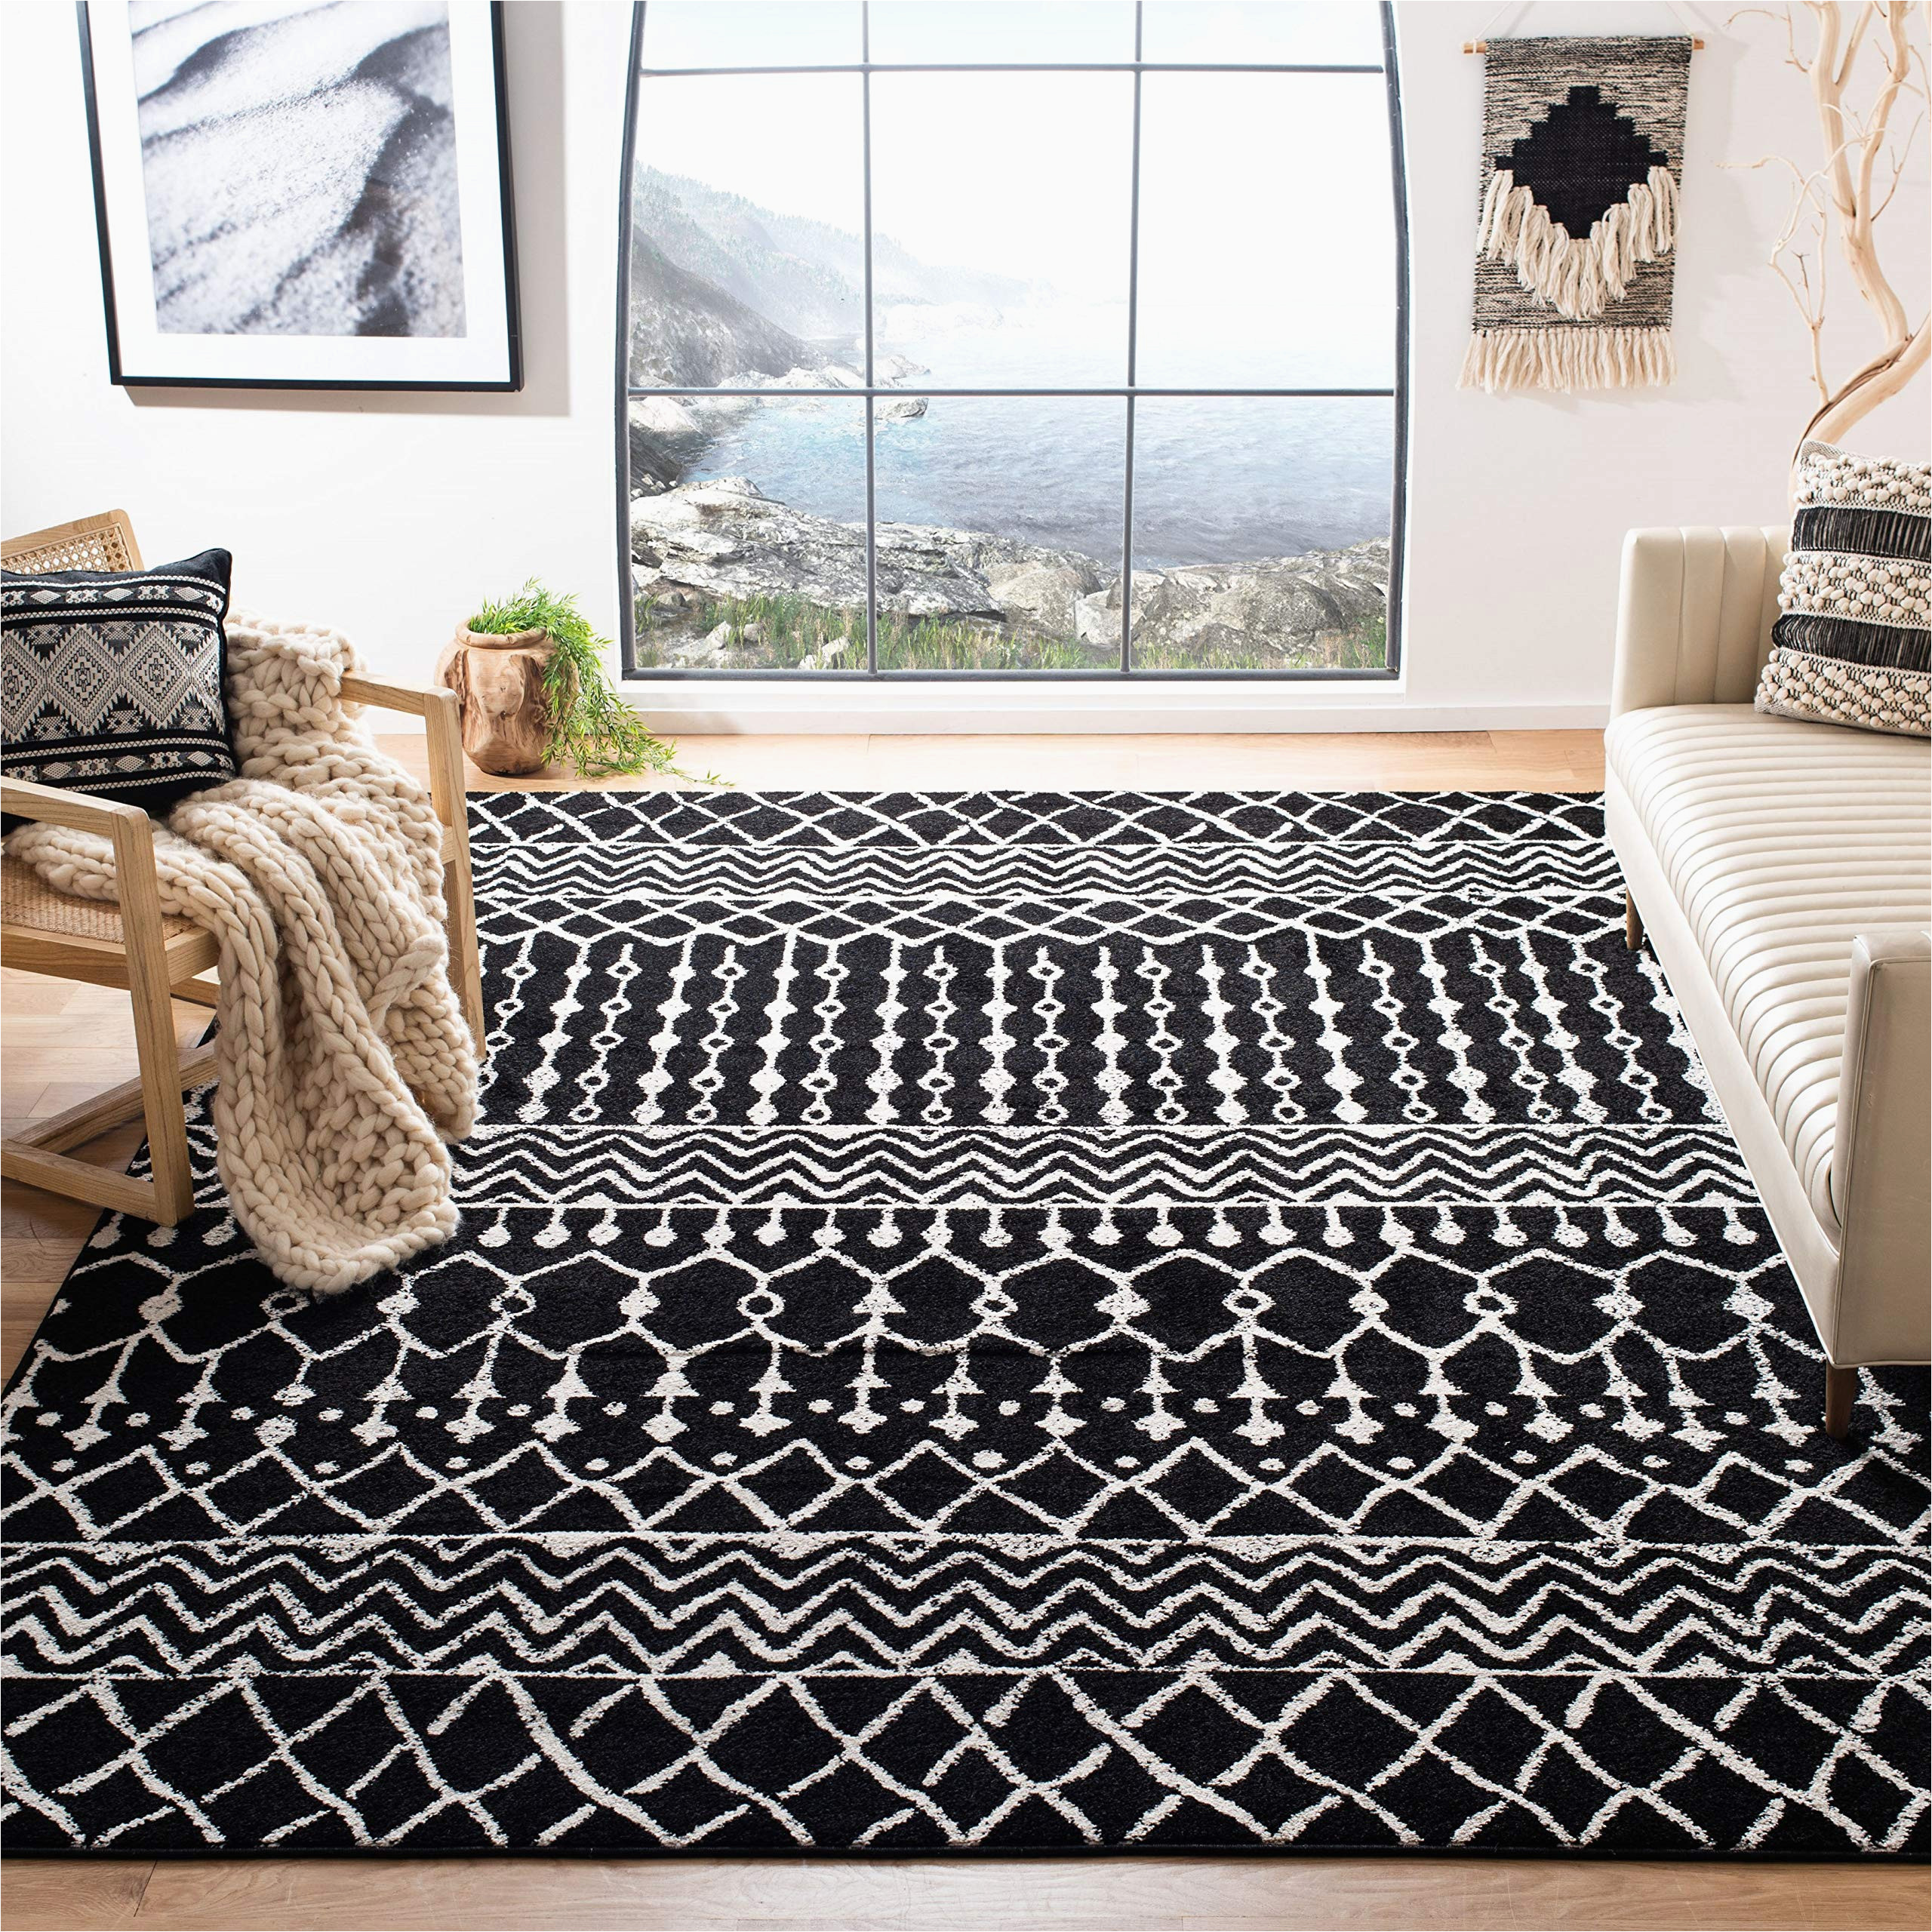 8 X 10 Black area Rug Safavieh Tulum Collection 8′ X 10′ Black/ivory Tul270z Moroccan Boho Distressed Non-shedding Living Room Bedroom Dining Home Office area Rug